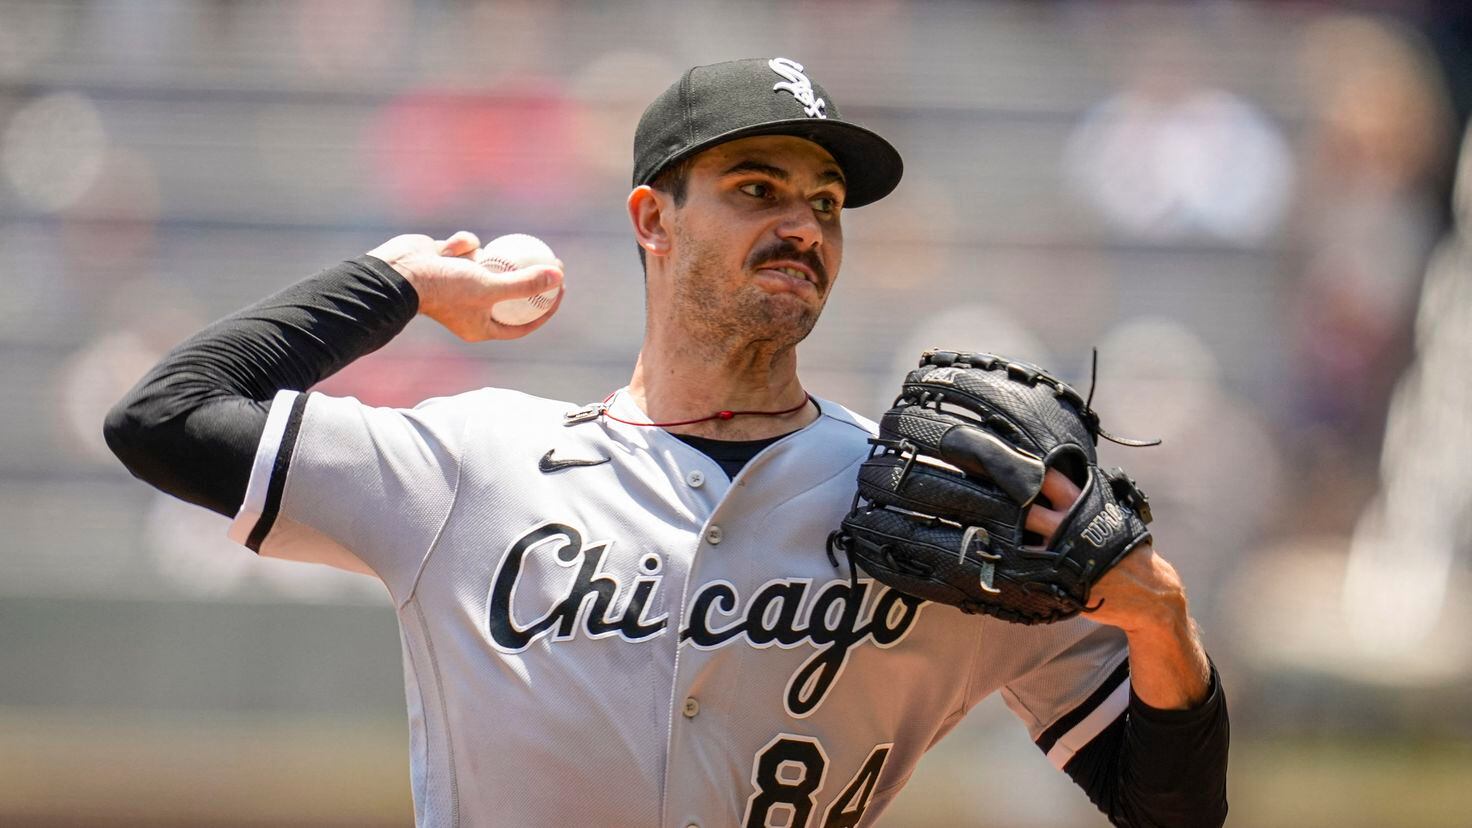 My biggest focus is executing': White Sox pitcher Dylan Cease